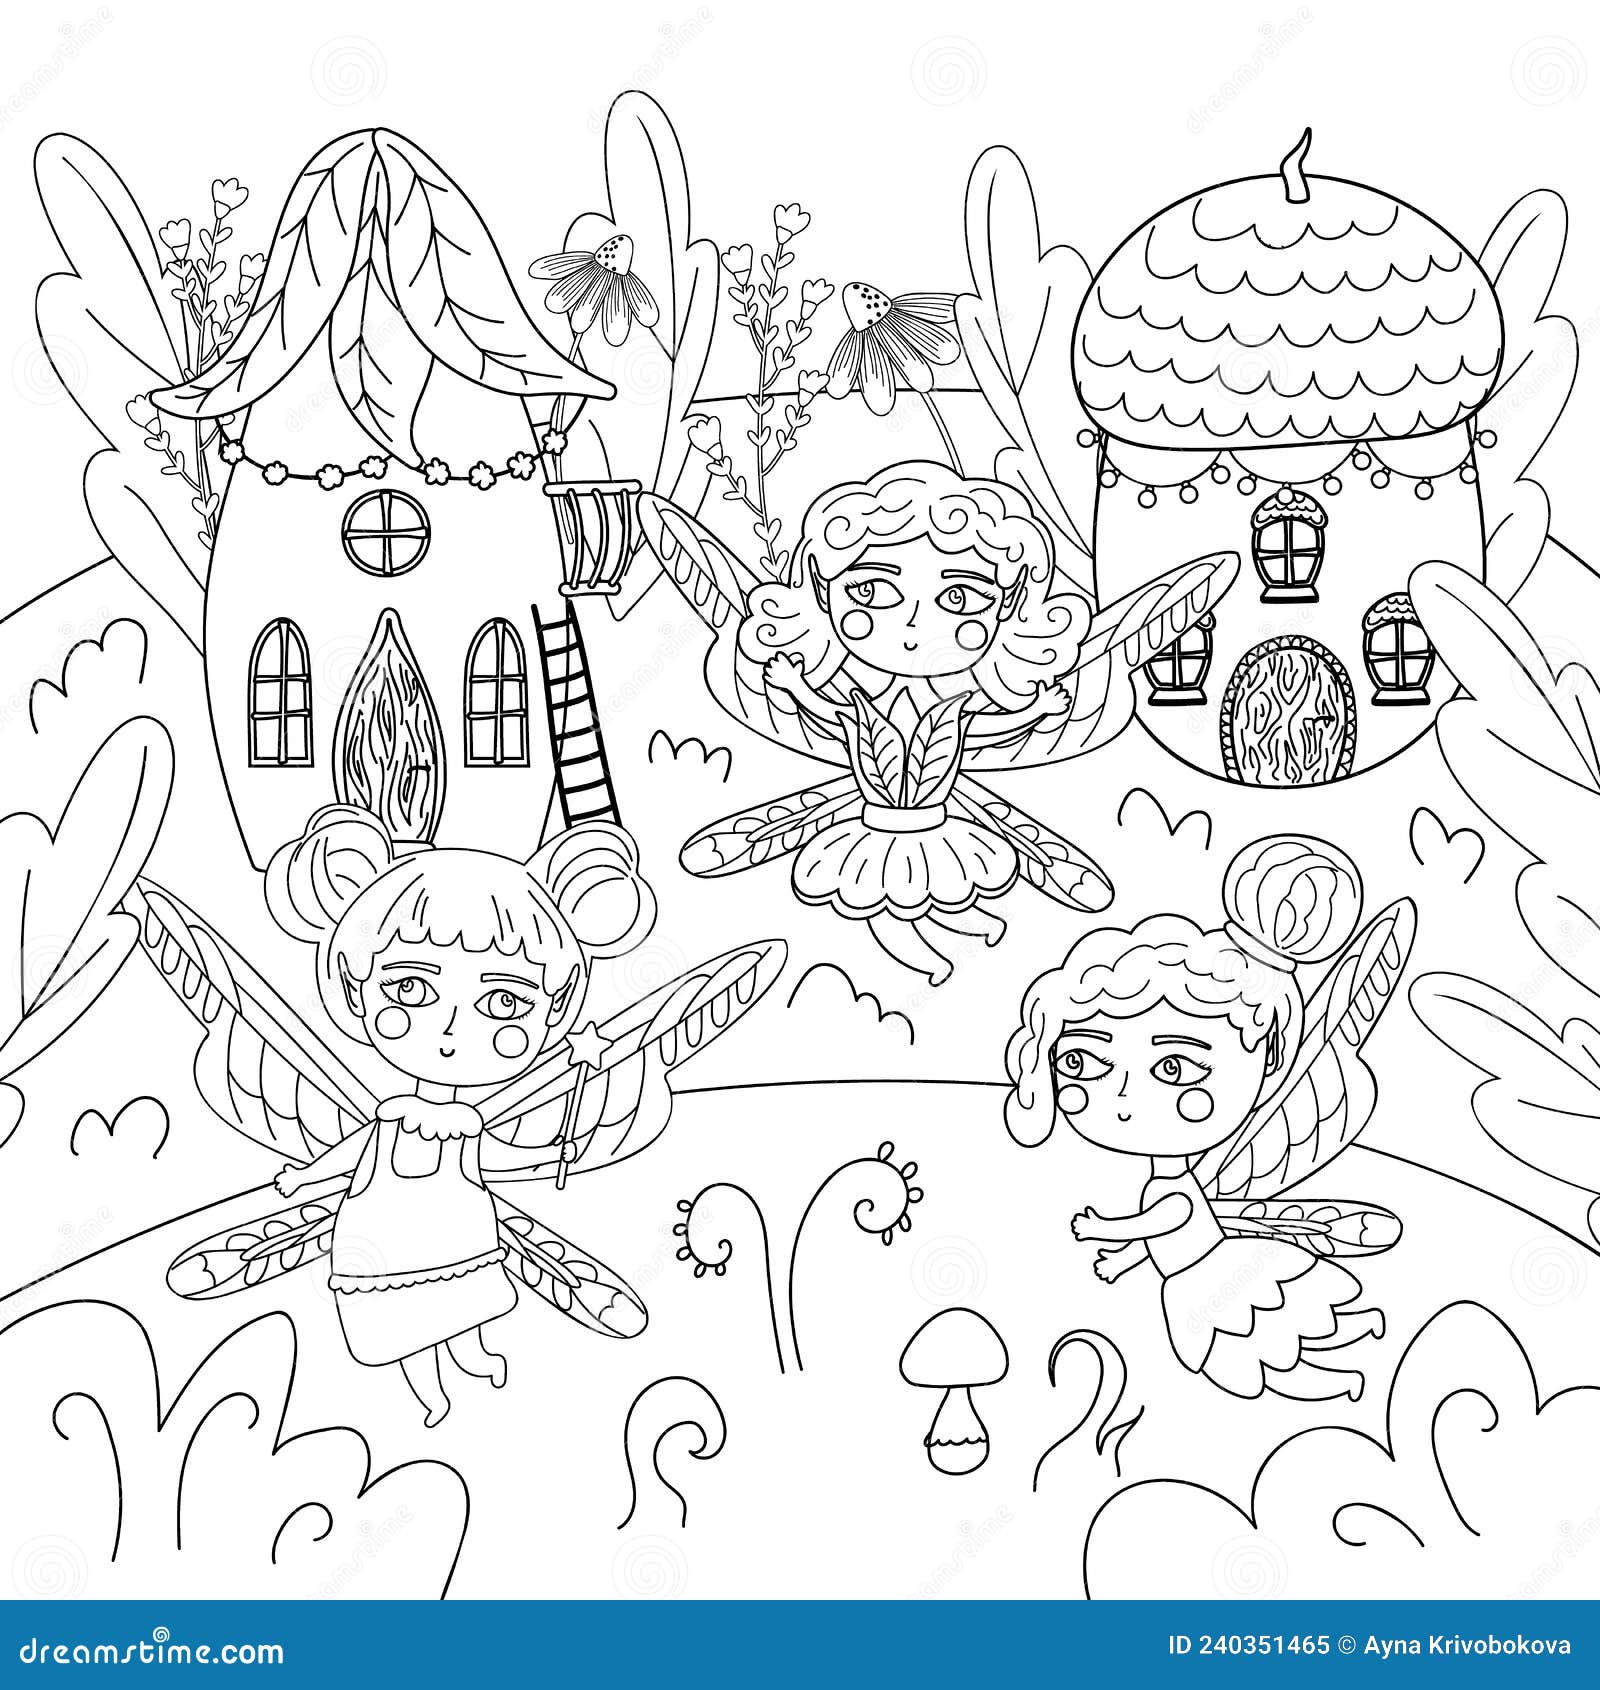 Illustration coloring page of magical fairies in fairytale village coloring page for adults antistress and for children fairy stock vector